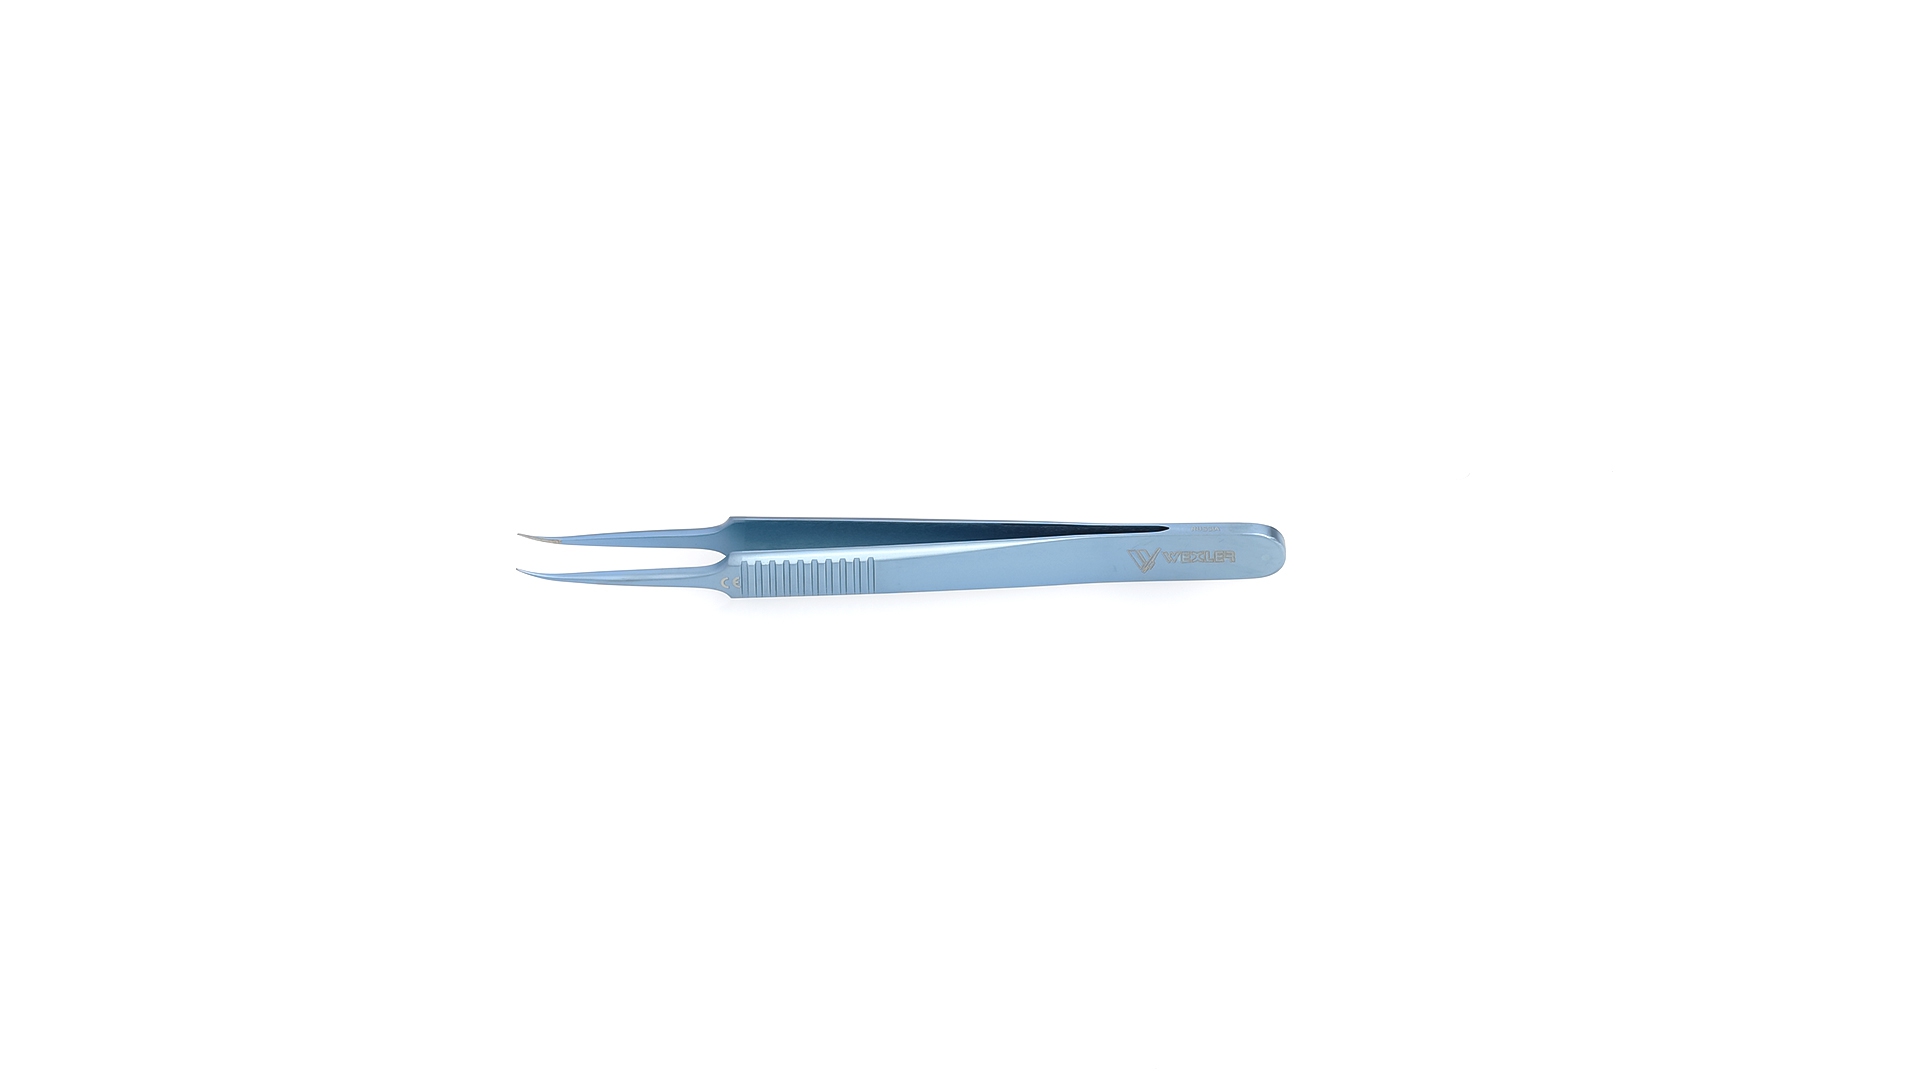 Jeweler Style Forceps # 5 - Curved 0.3mm TC coated tips